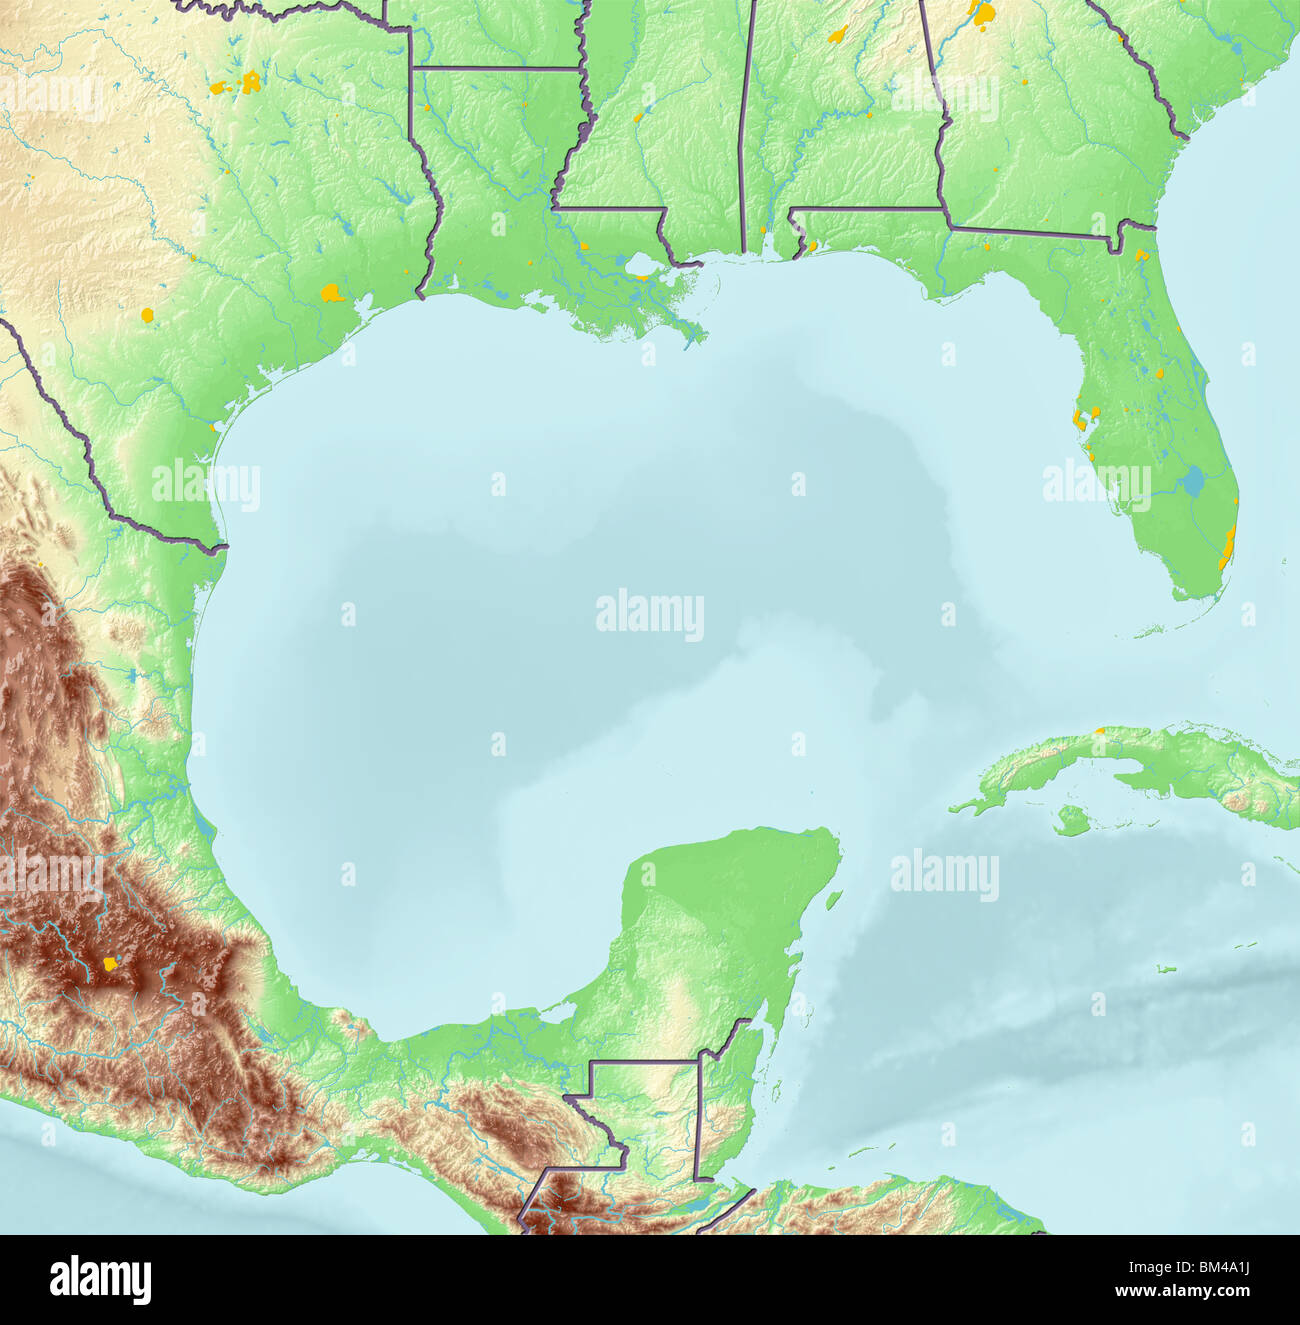 Gulf of Mexico, shaded relief map. Stock Photo